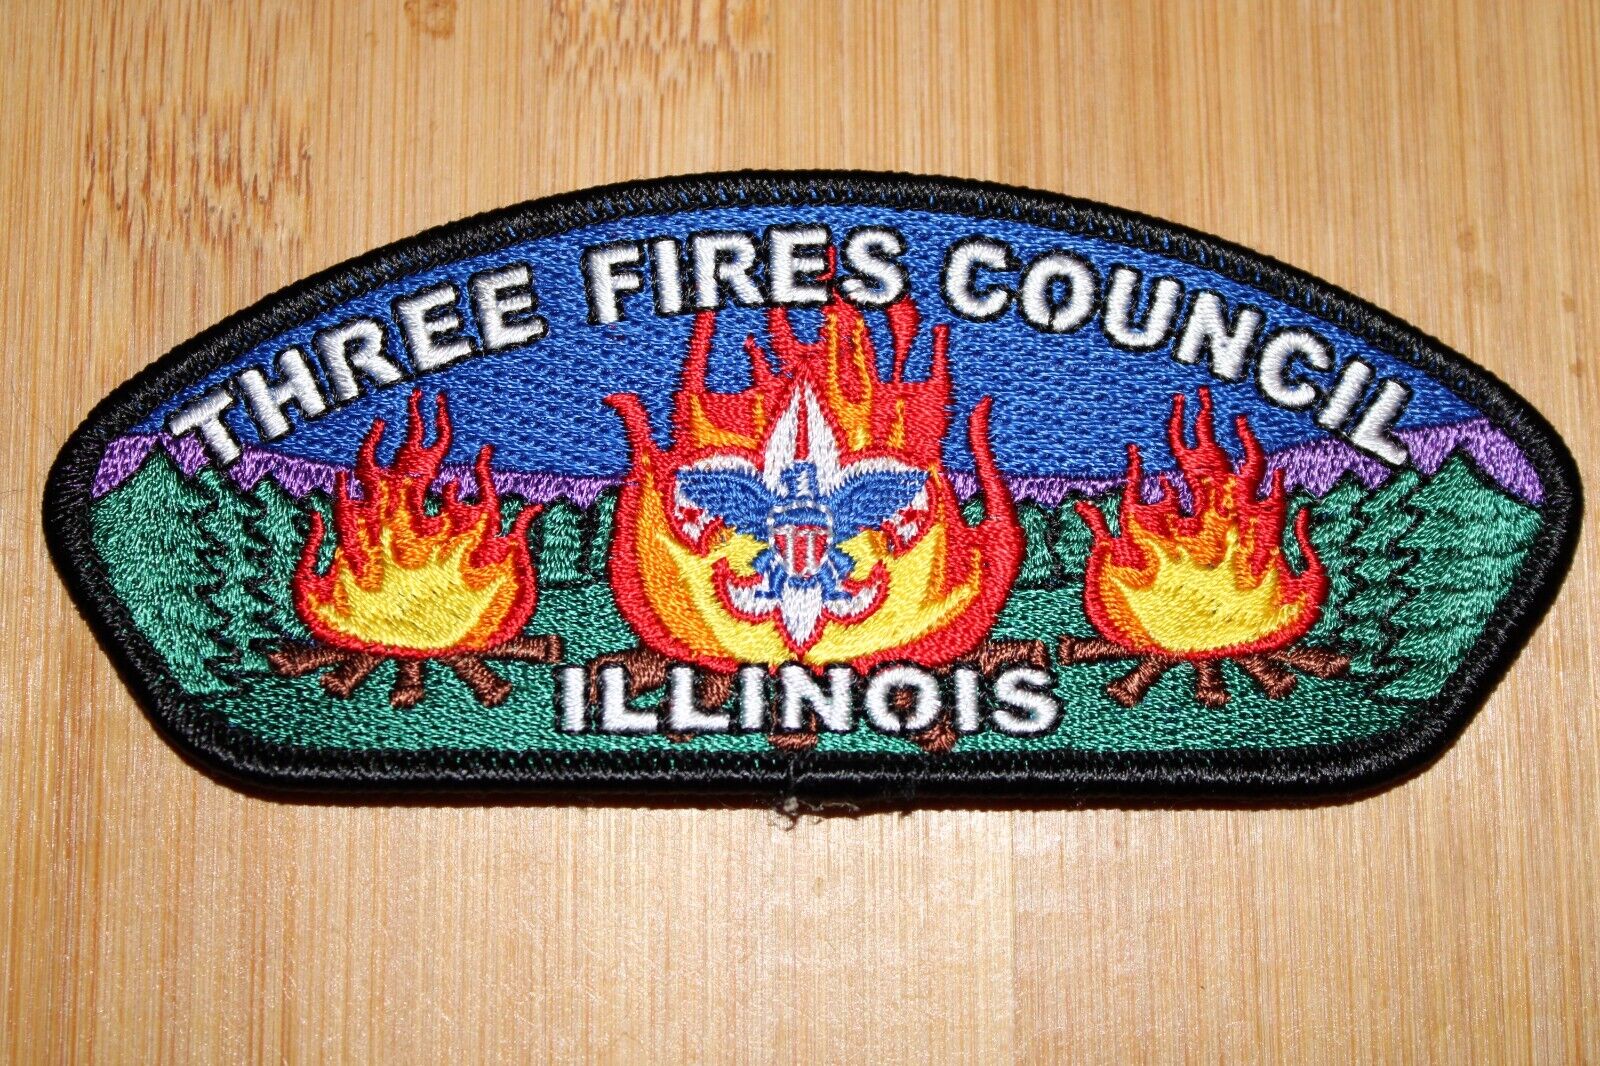 Boy Scouts of America BSA Patch Three Fires Council Illinois